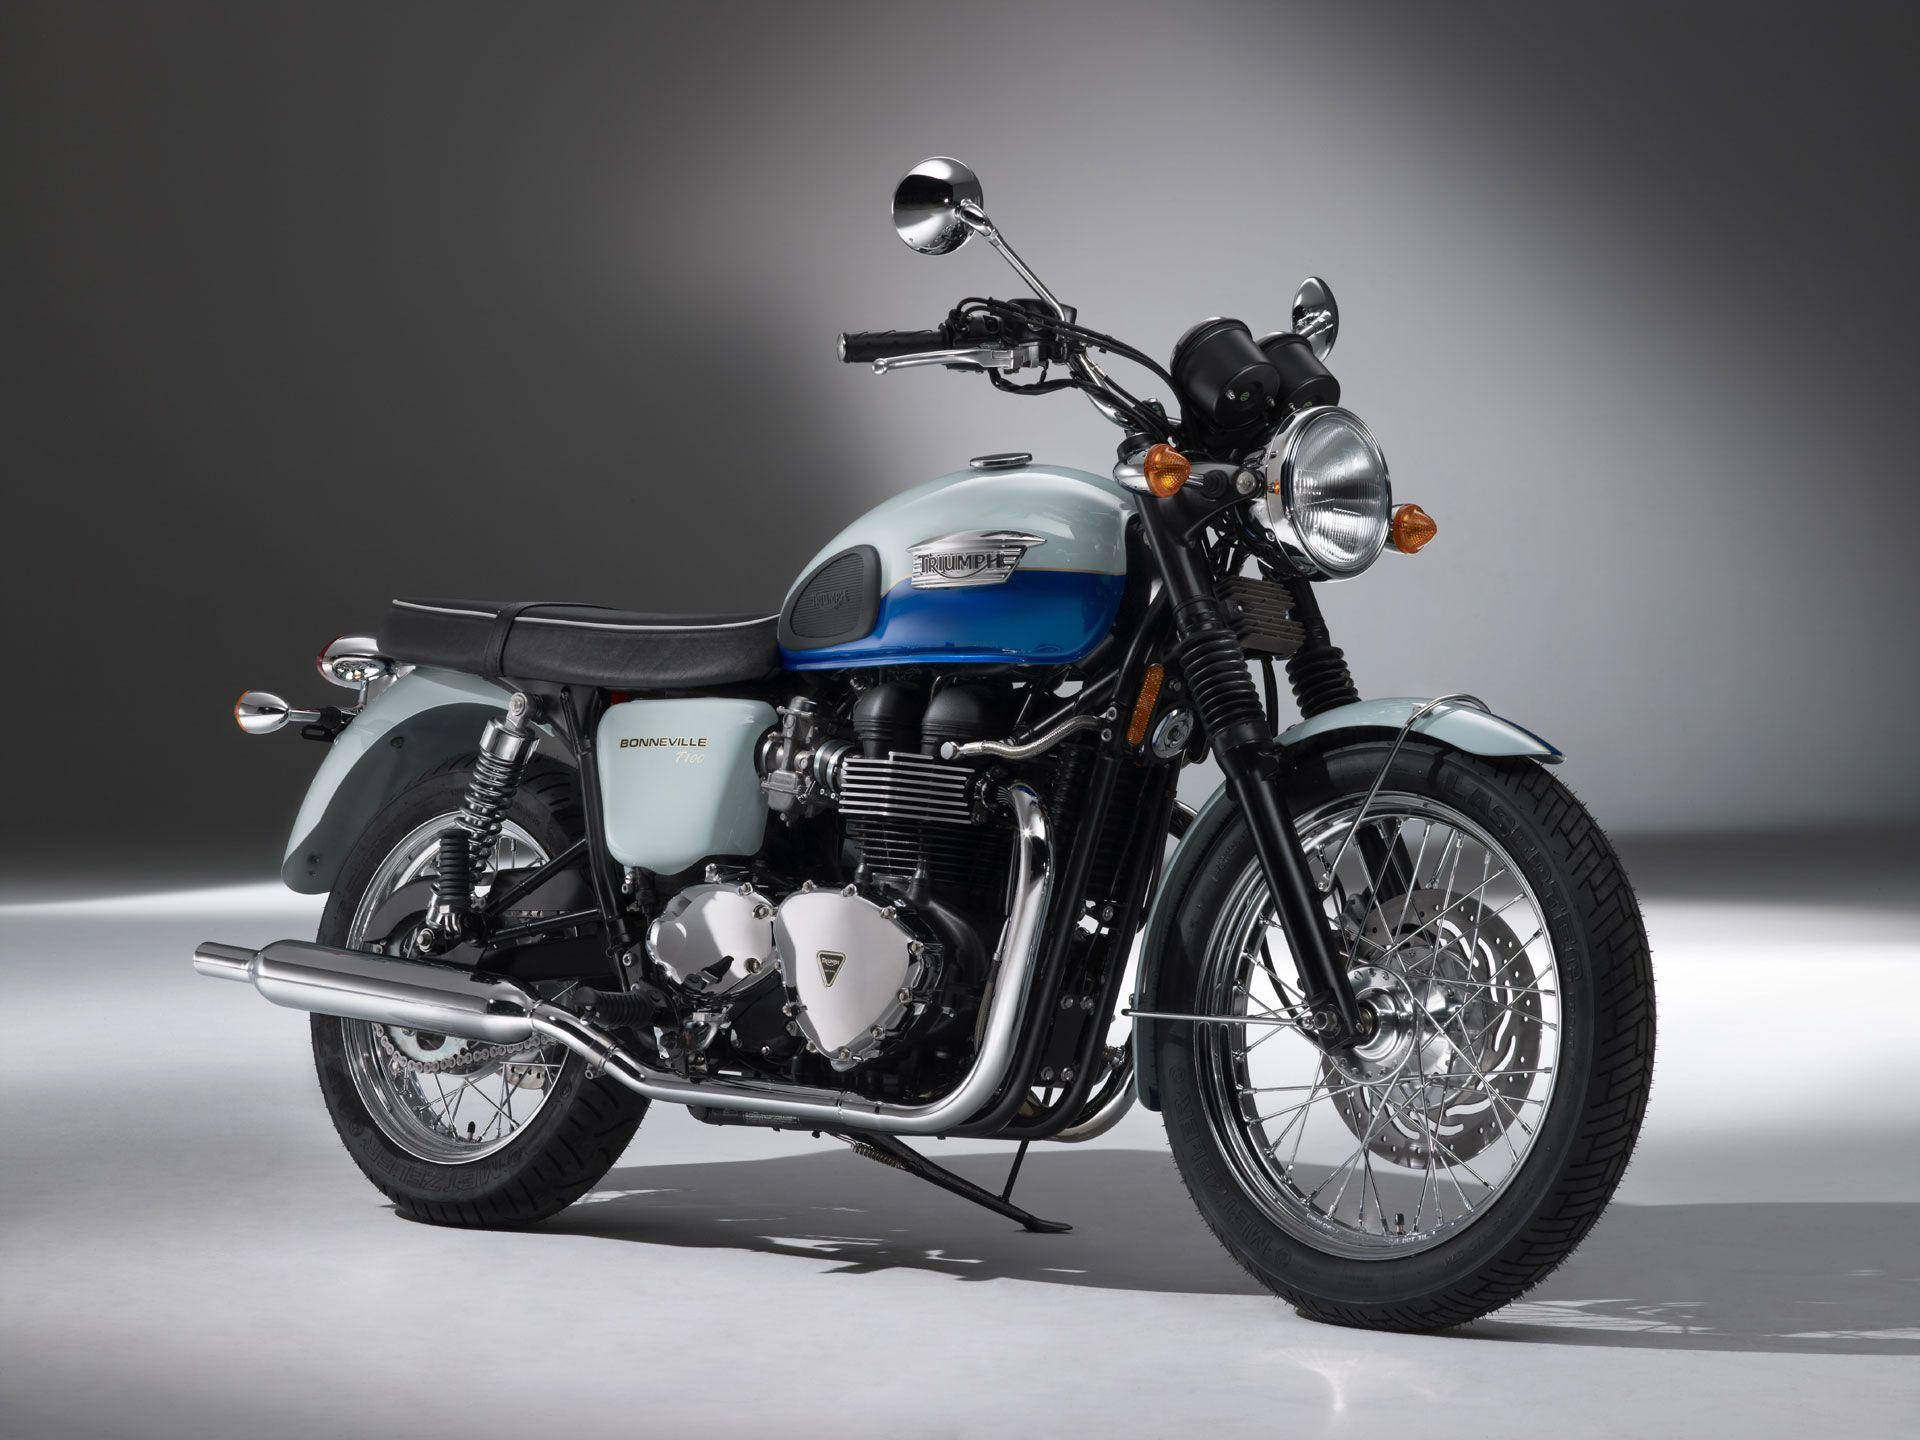 Triumph Bonneville T100 In Stunning Blue - A Classic Reinvented